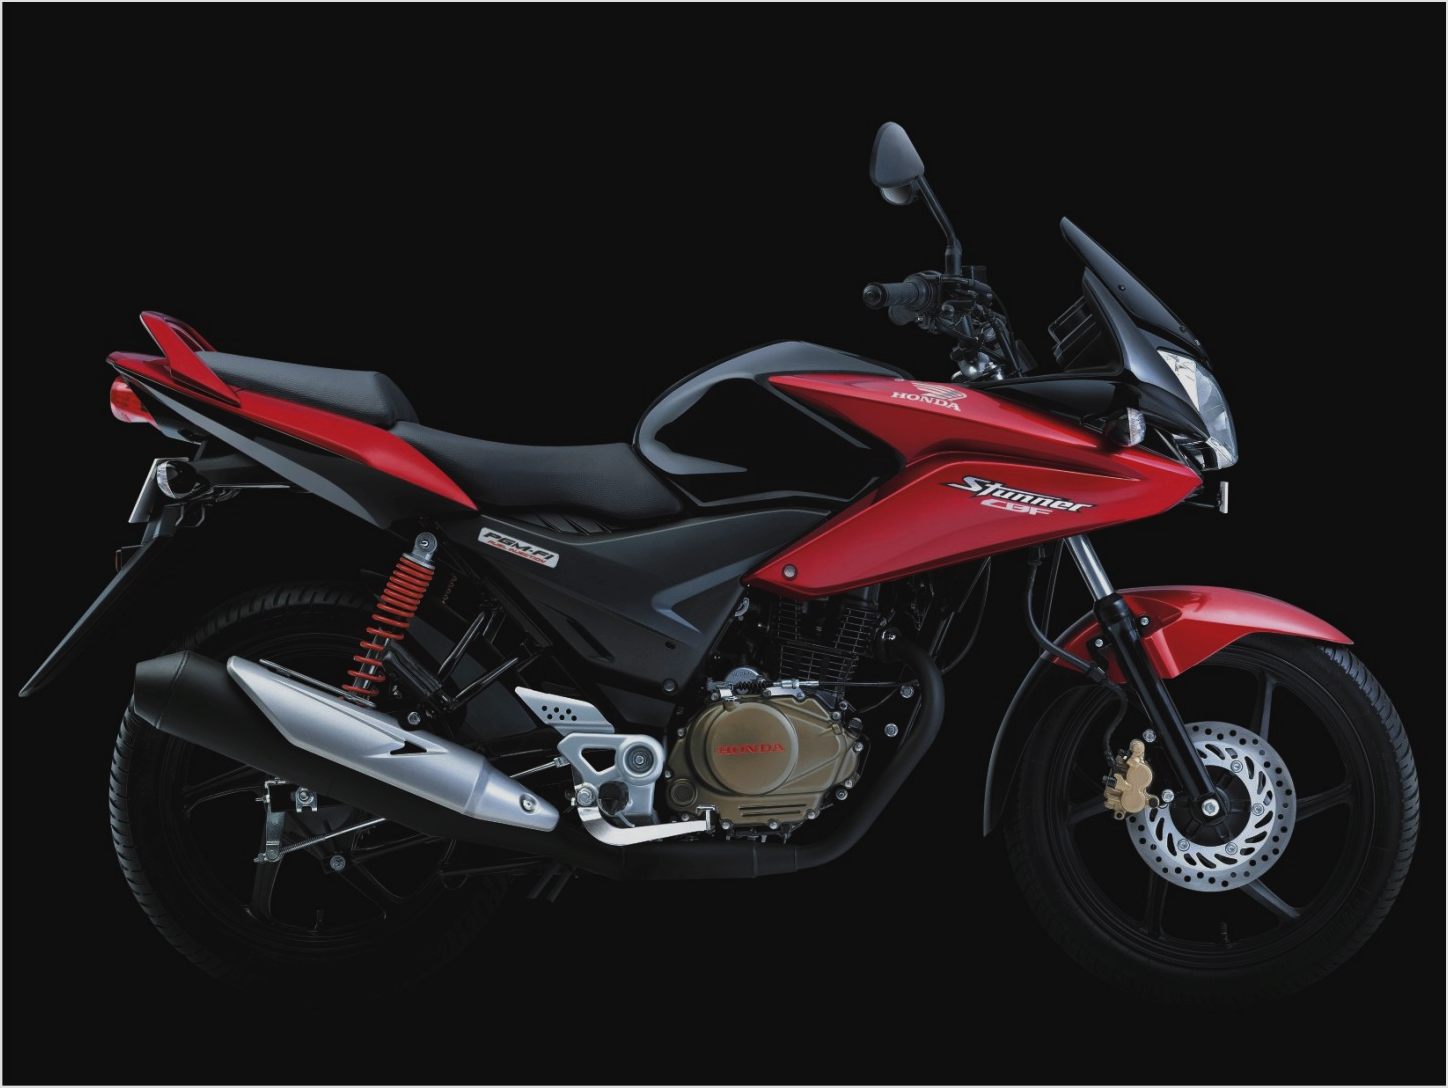 2009 Hero Honda Glamour 125 Pgm Fi Specs Images And Pricing